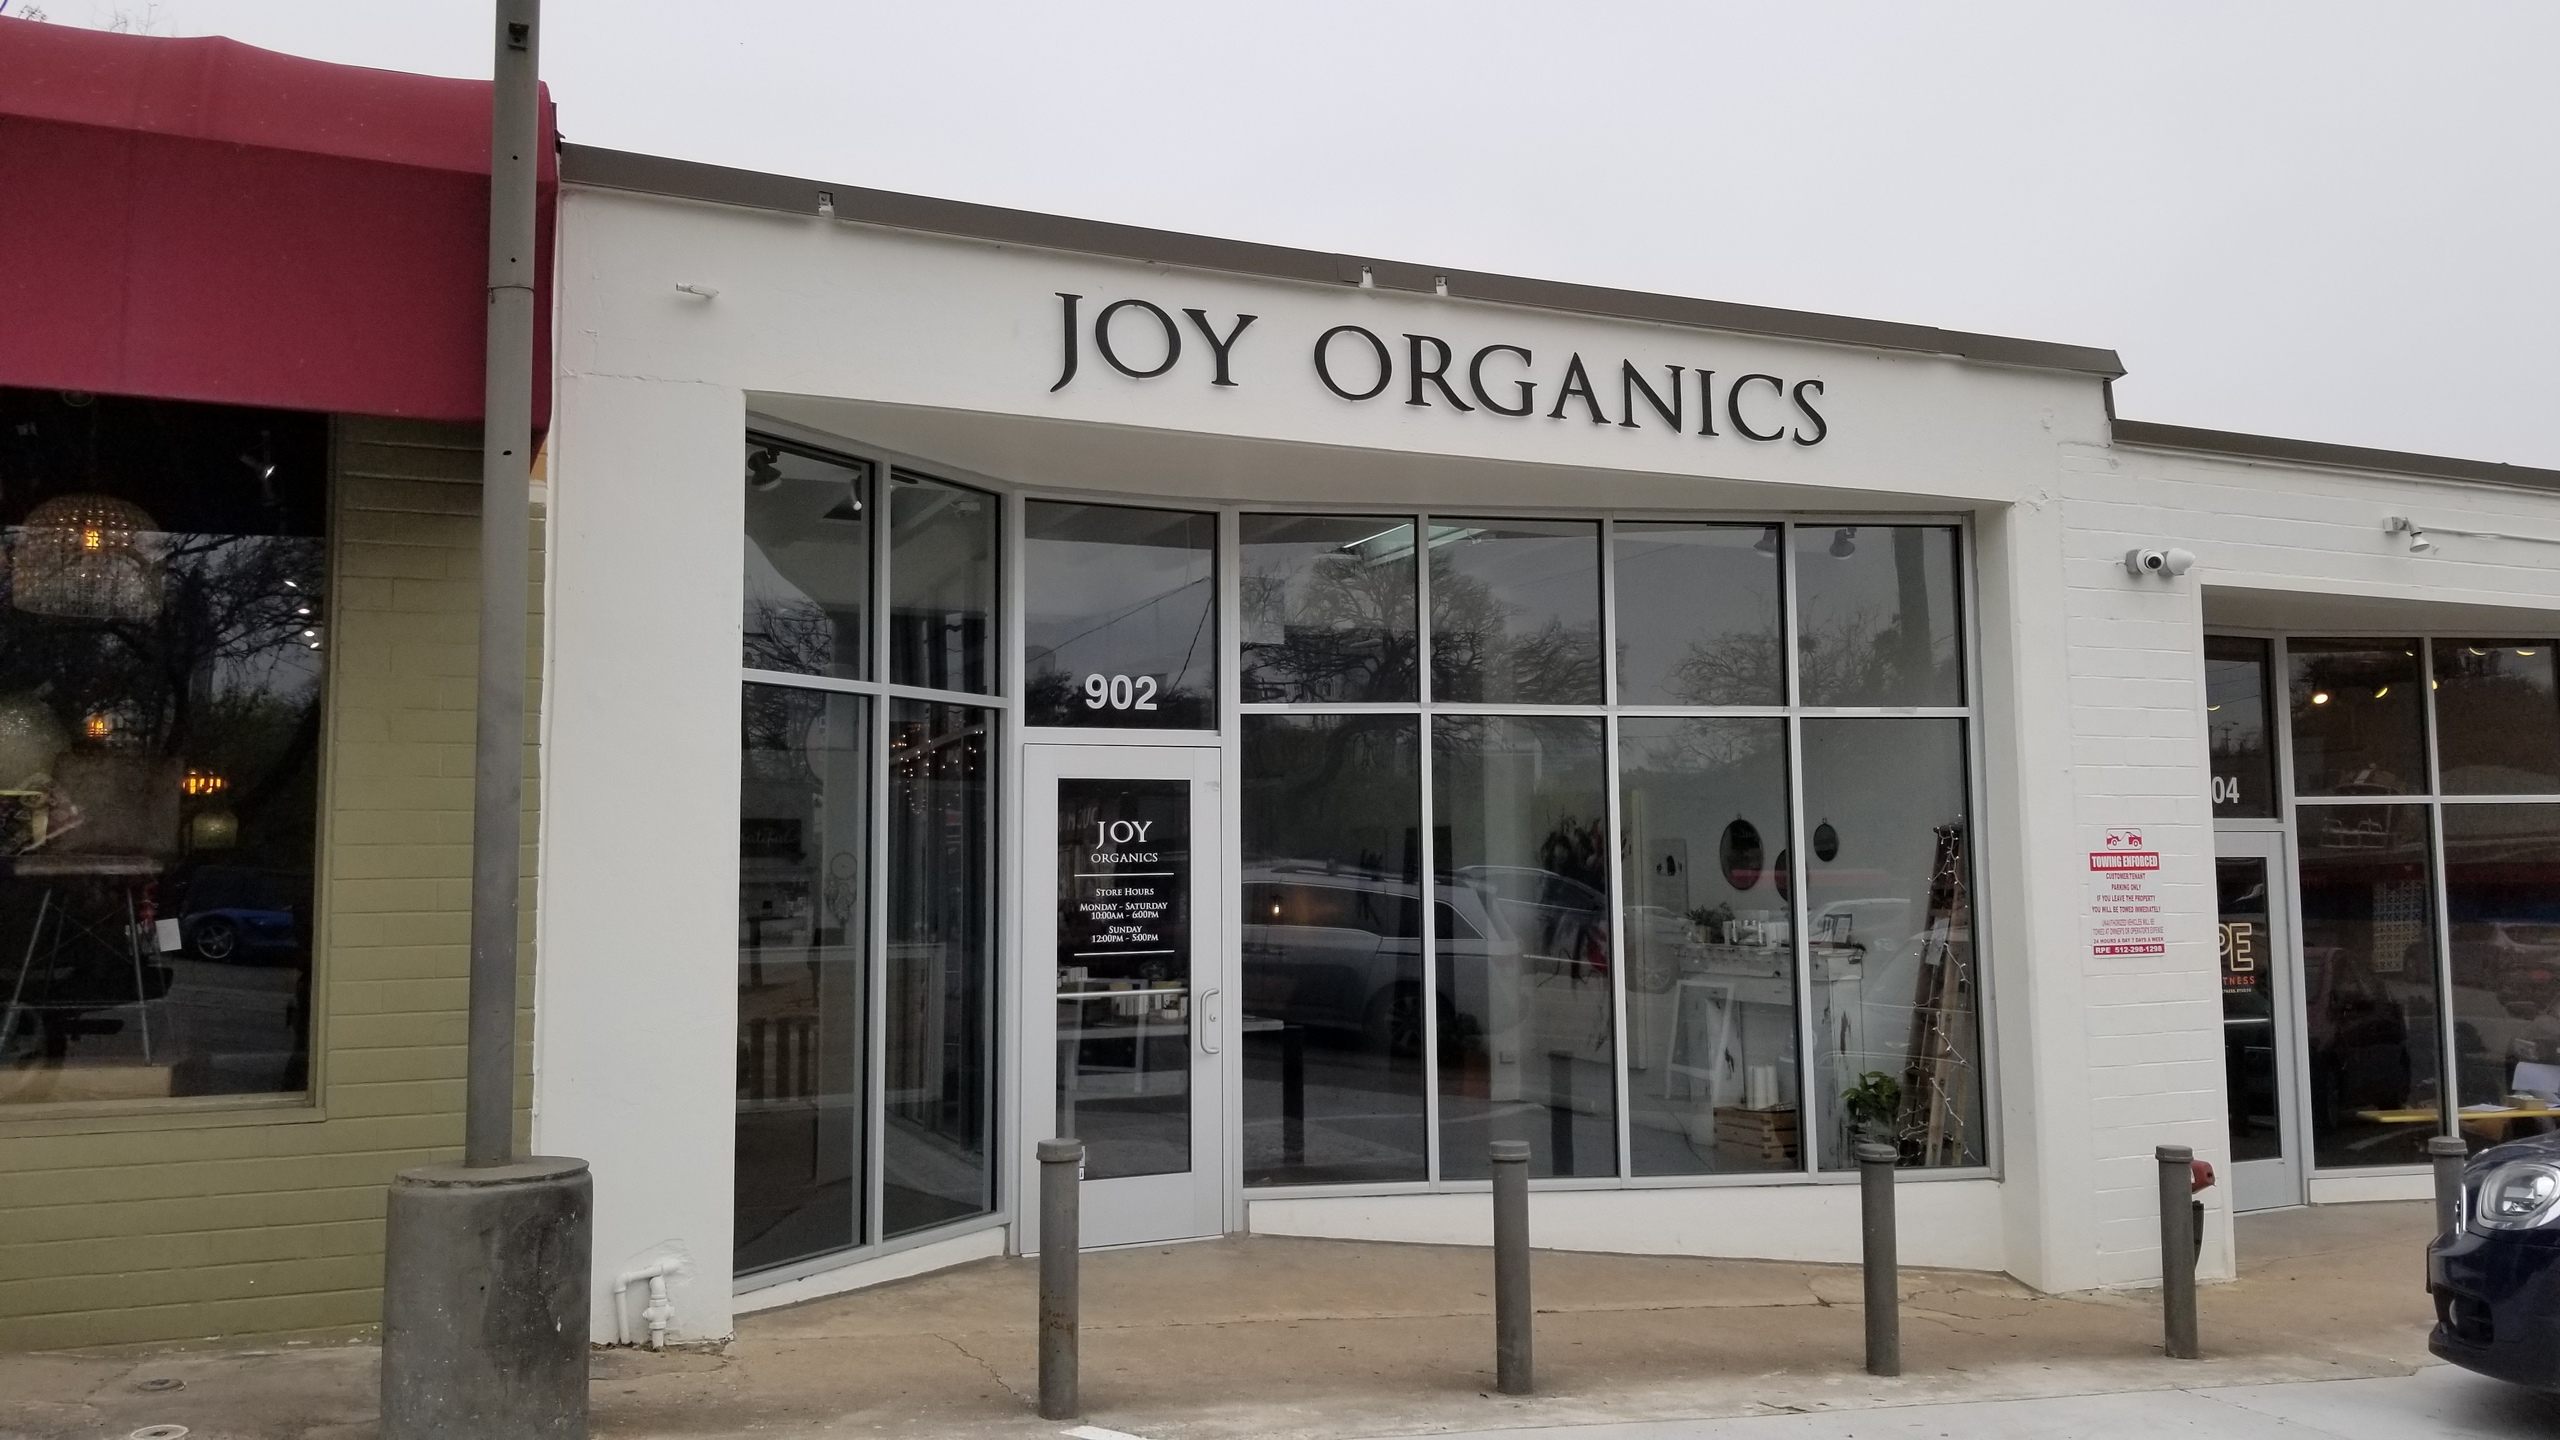 The exterior of Joy Organics Austin store under a overcast sky. In our first "Spotlight" video, we visited the Joy Organics store in Austin, Texas to learn more about buying the right CBD.